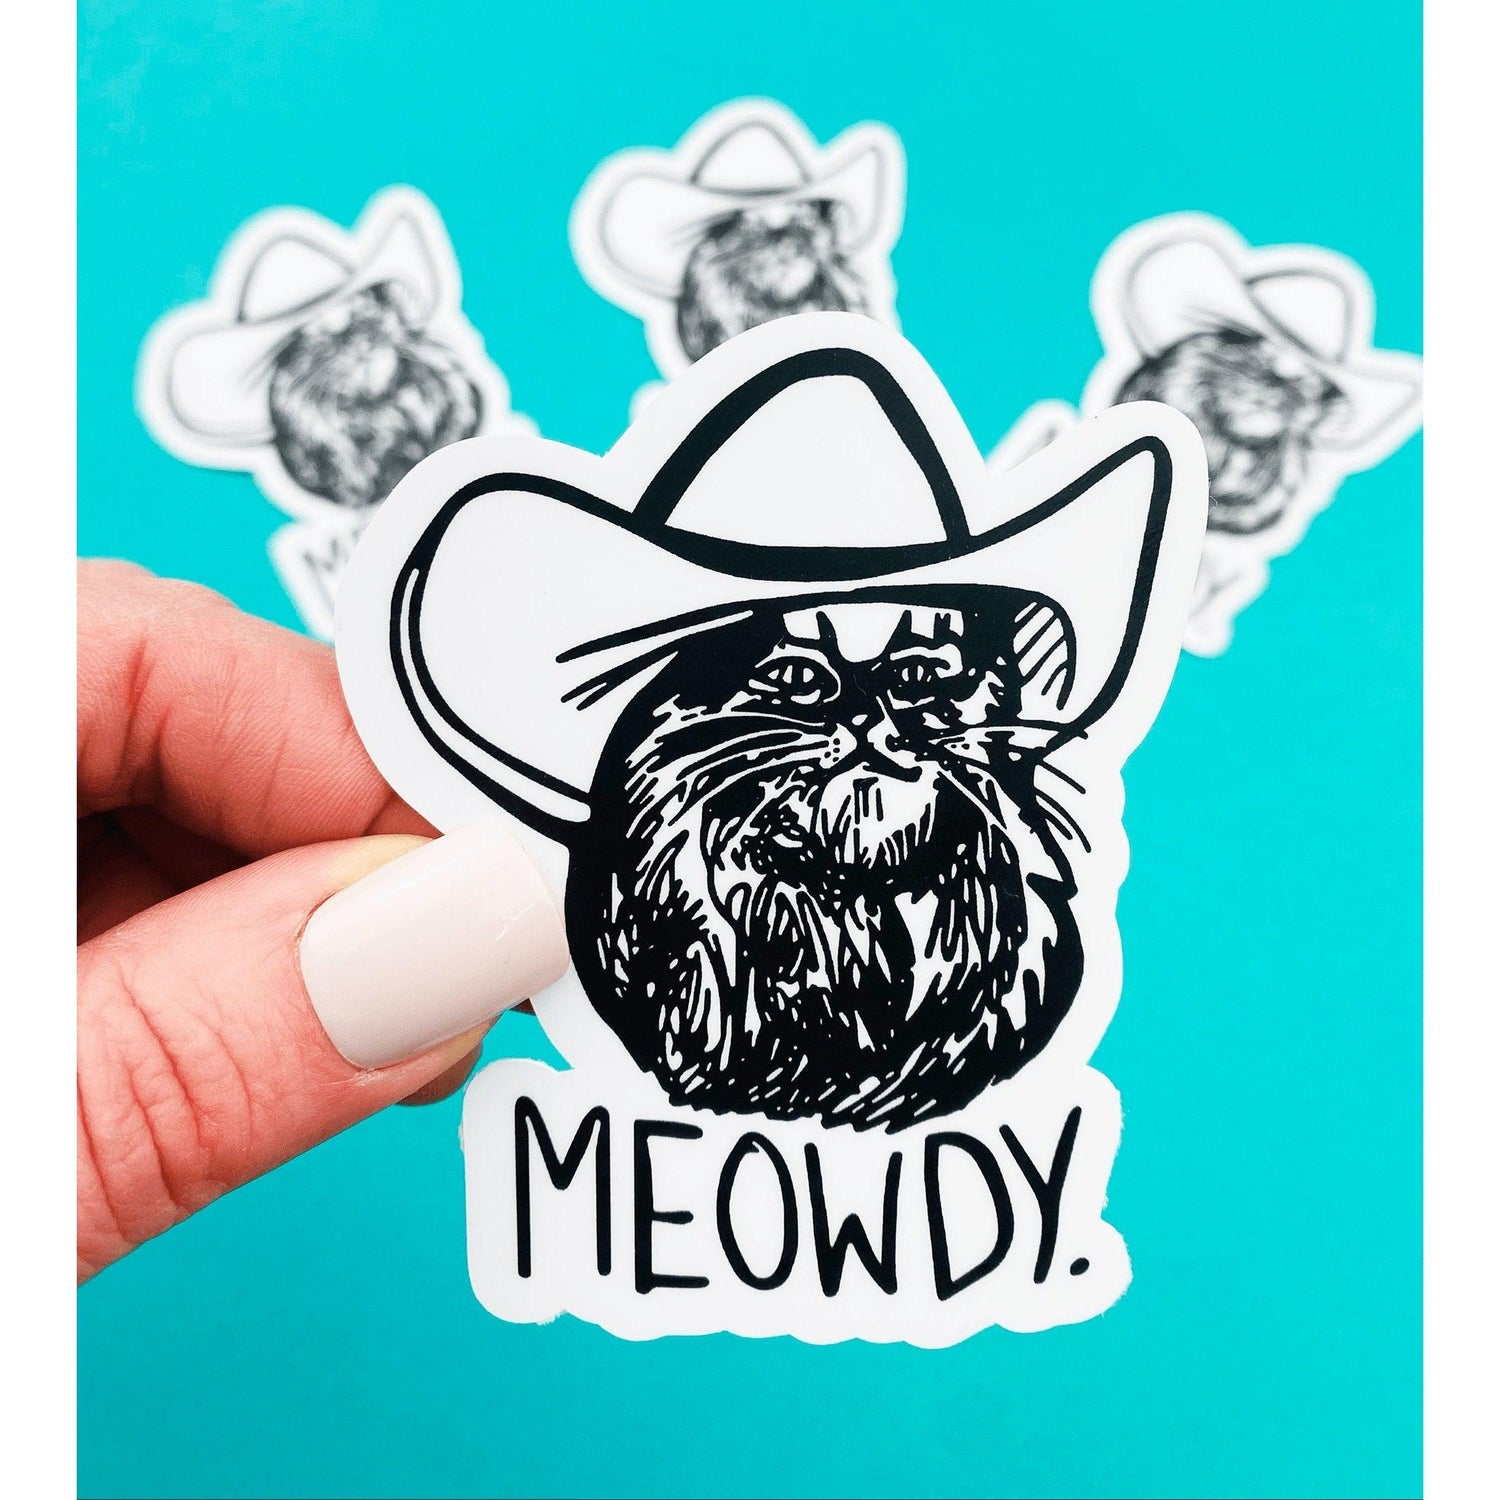 Meowdy Cat Sticker for Country Living Cat Cowboy Hat Sticker Country Kitty Decal Funny Country Sticker - Ottos Grotto :: Stickers For Your Stuff